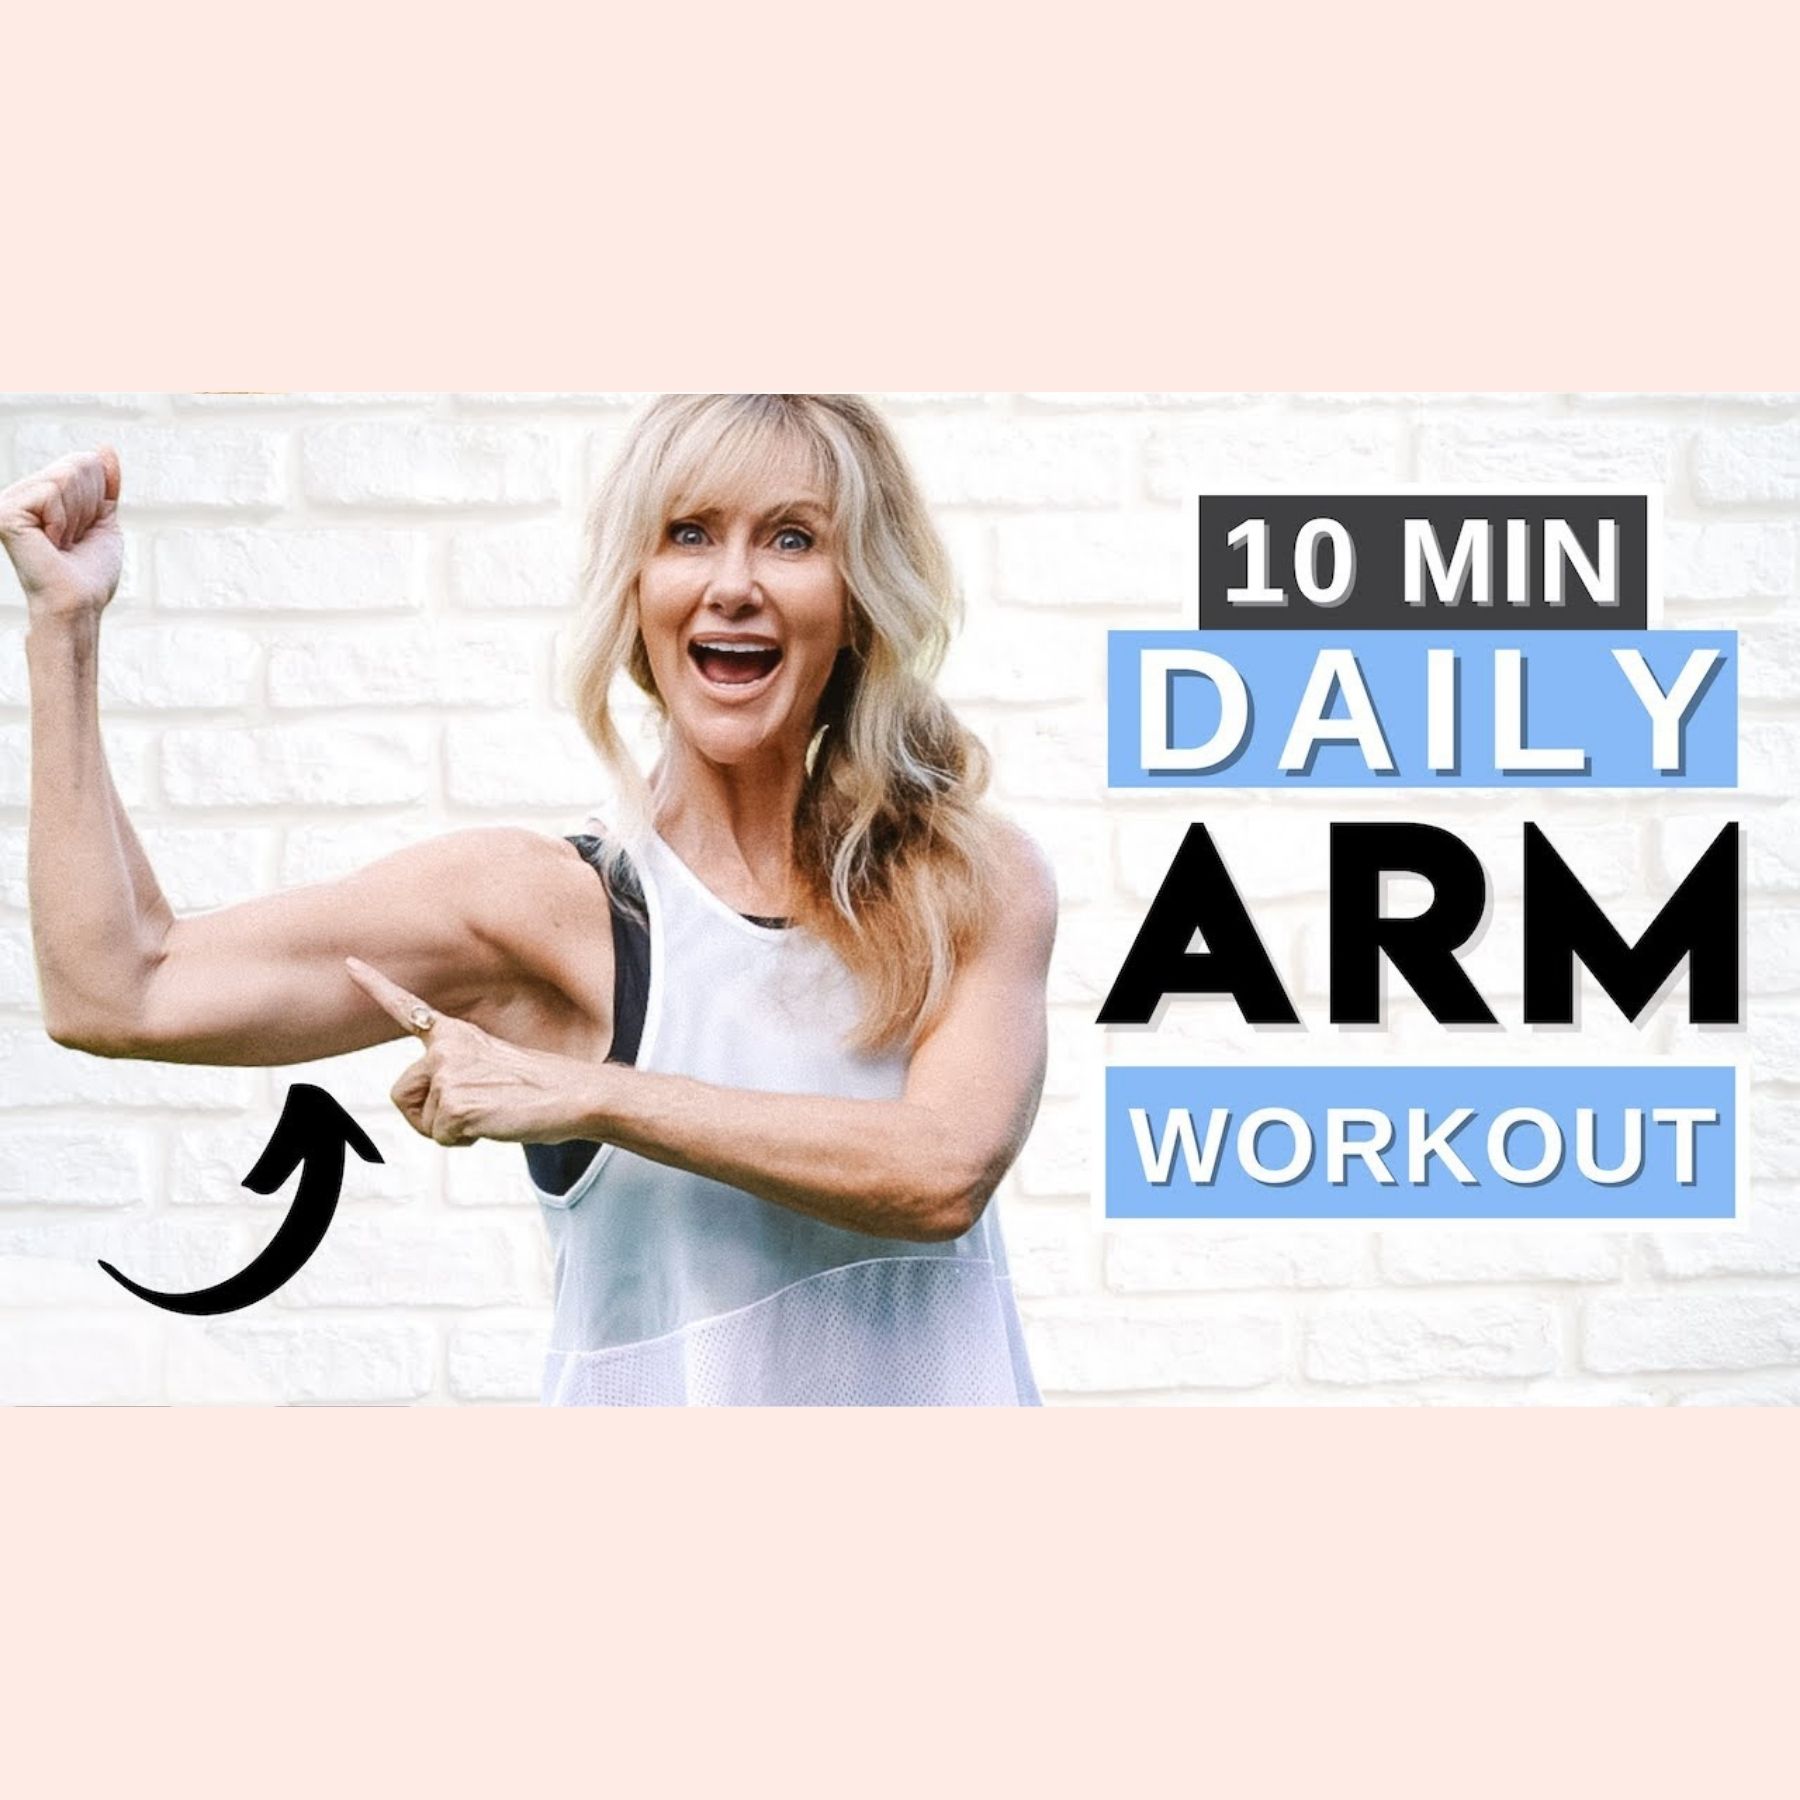 Do This Every Morning To Lose Flabby Arms  Slimmer Arms In 14 Days! No  Equipment - Diary of a Fit Mommy